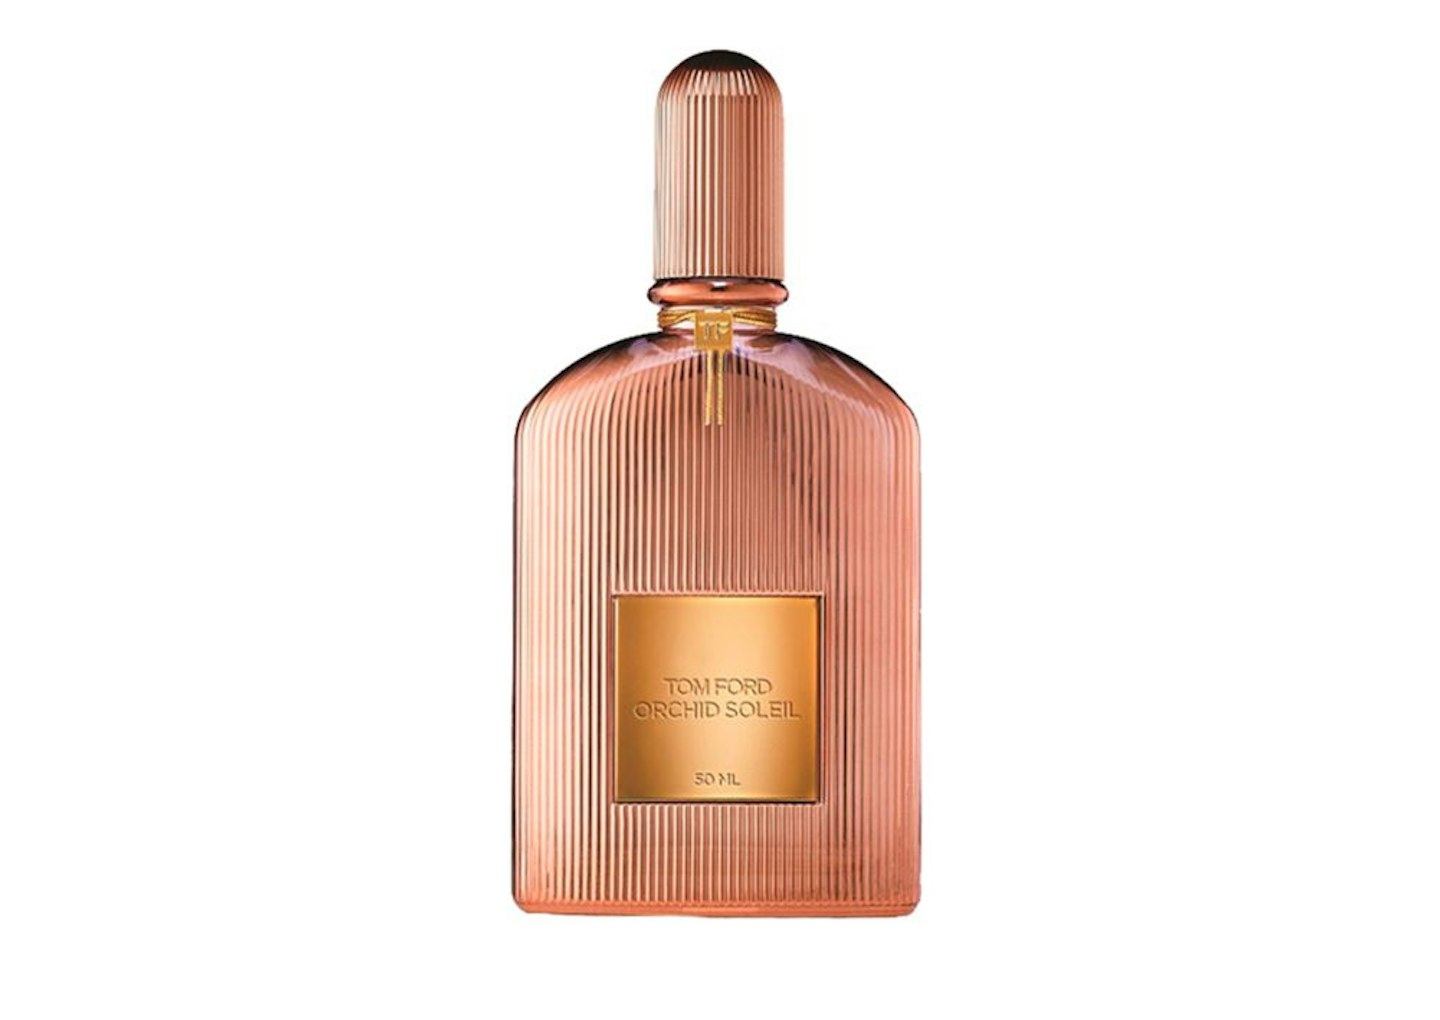 Tom Ford Orchid Soleil, £82 for 50ml